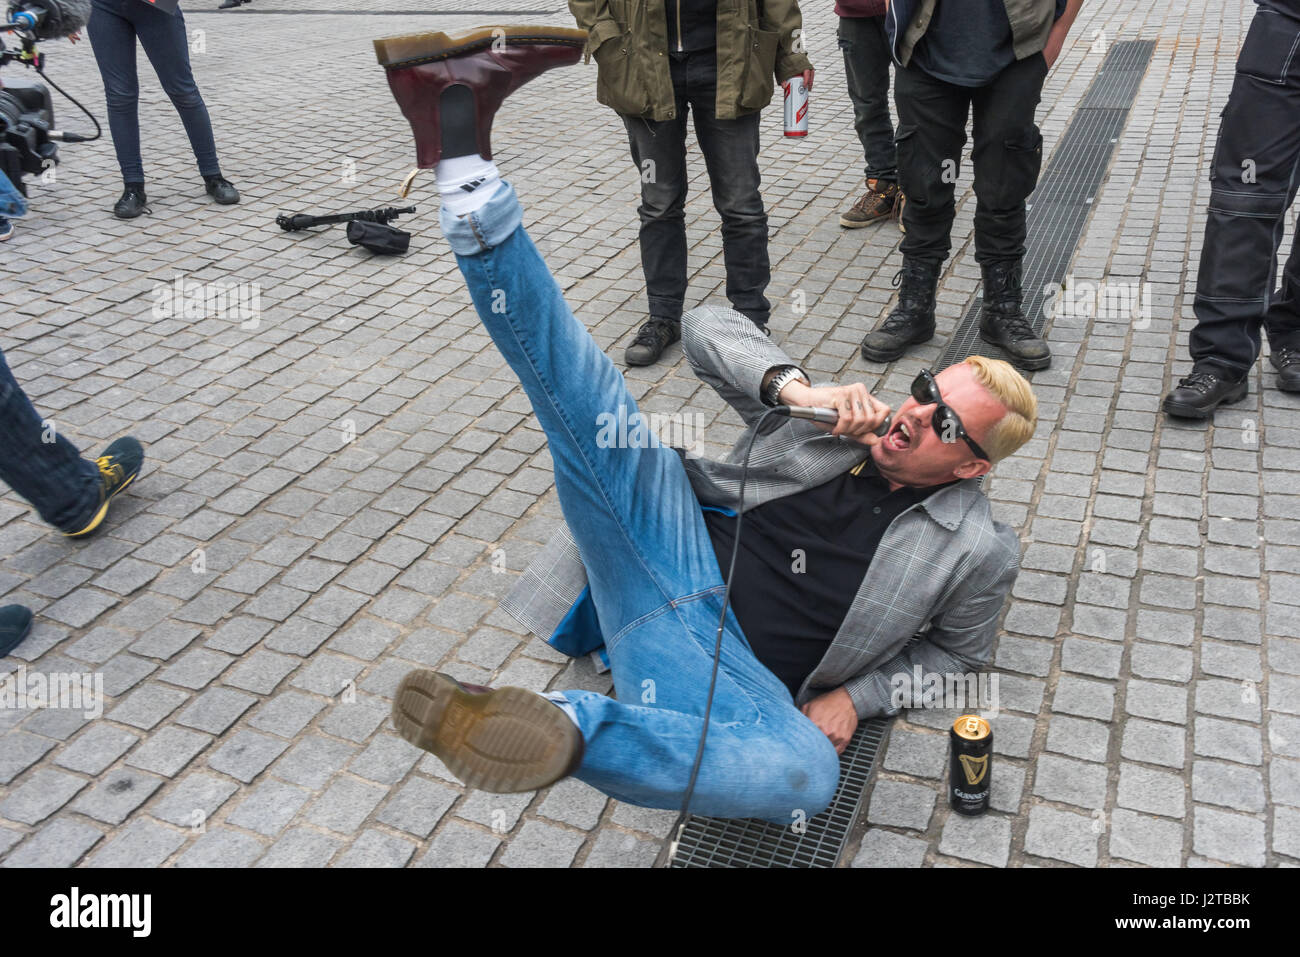 London, UK. 30th April 2017.  Adam Clifford (aka Jimmy Kunt) ends his performance in typical style at the Class War protest against gentrification outside Bermondsey's White Cube gallery. There were also performances by Cosmo, Potent Whisper nd others, along with speeches by Simon Elmer of ASH, Martin Wright and Ian Bone. Credit: Peter Marshall/Alamy Live News Stock Photo